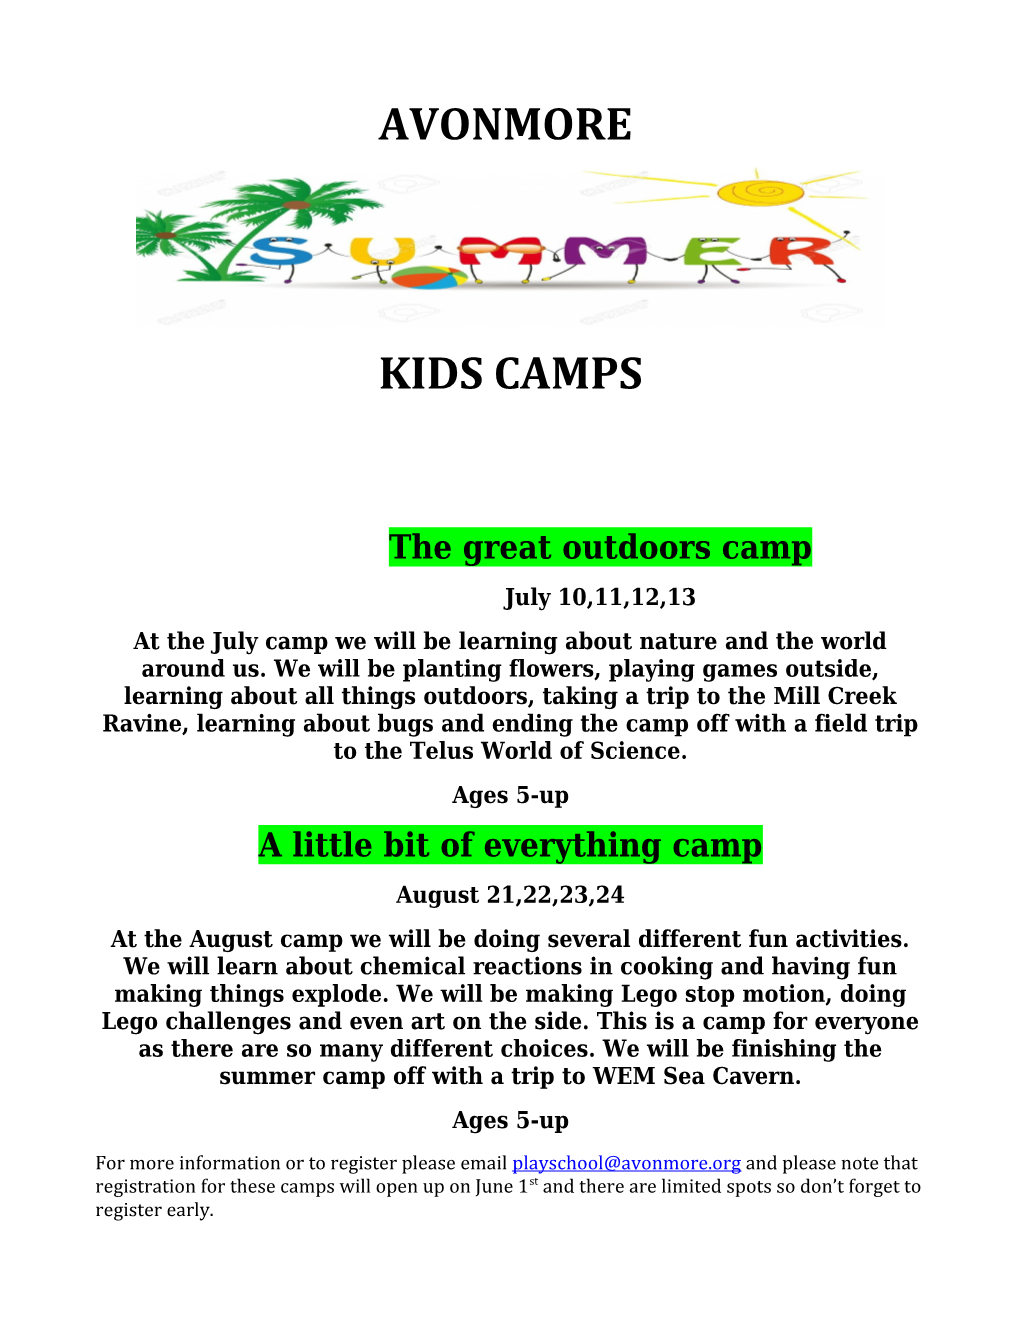 The Great Outdoors Camp